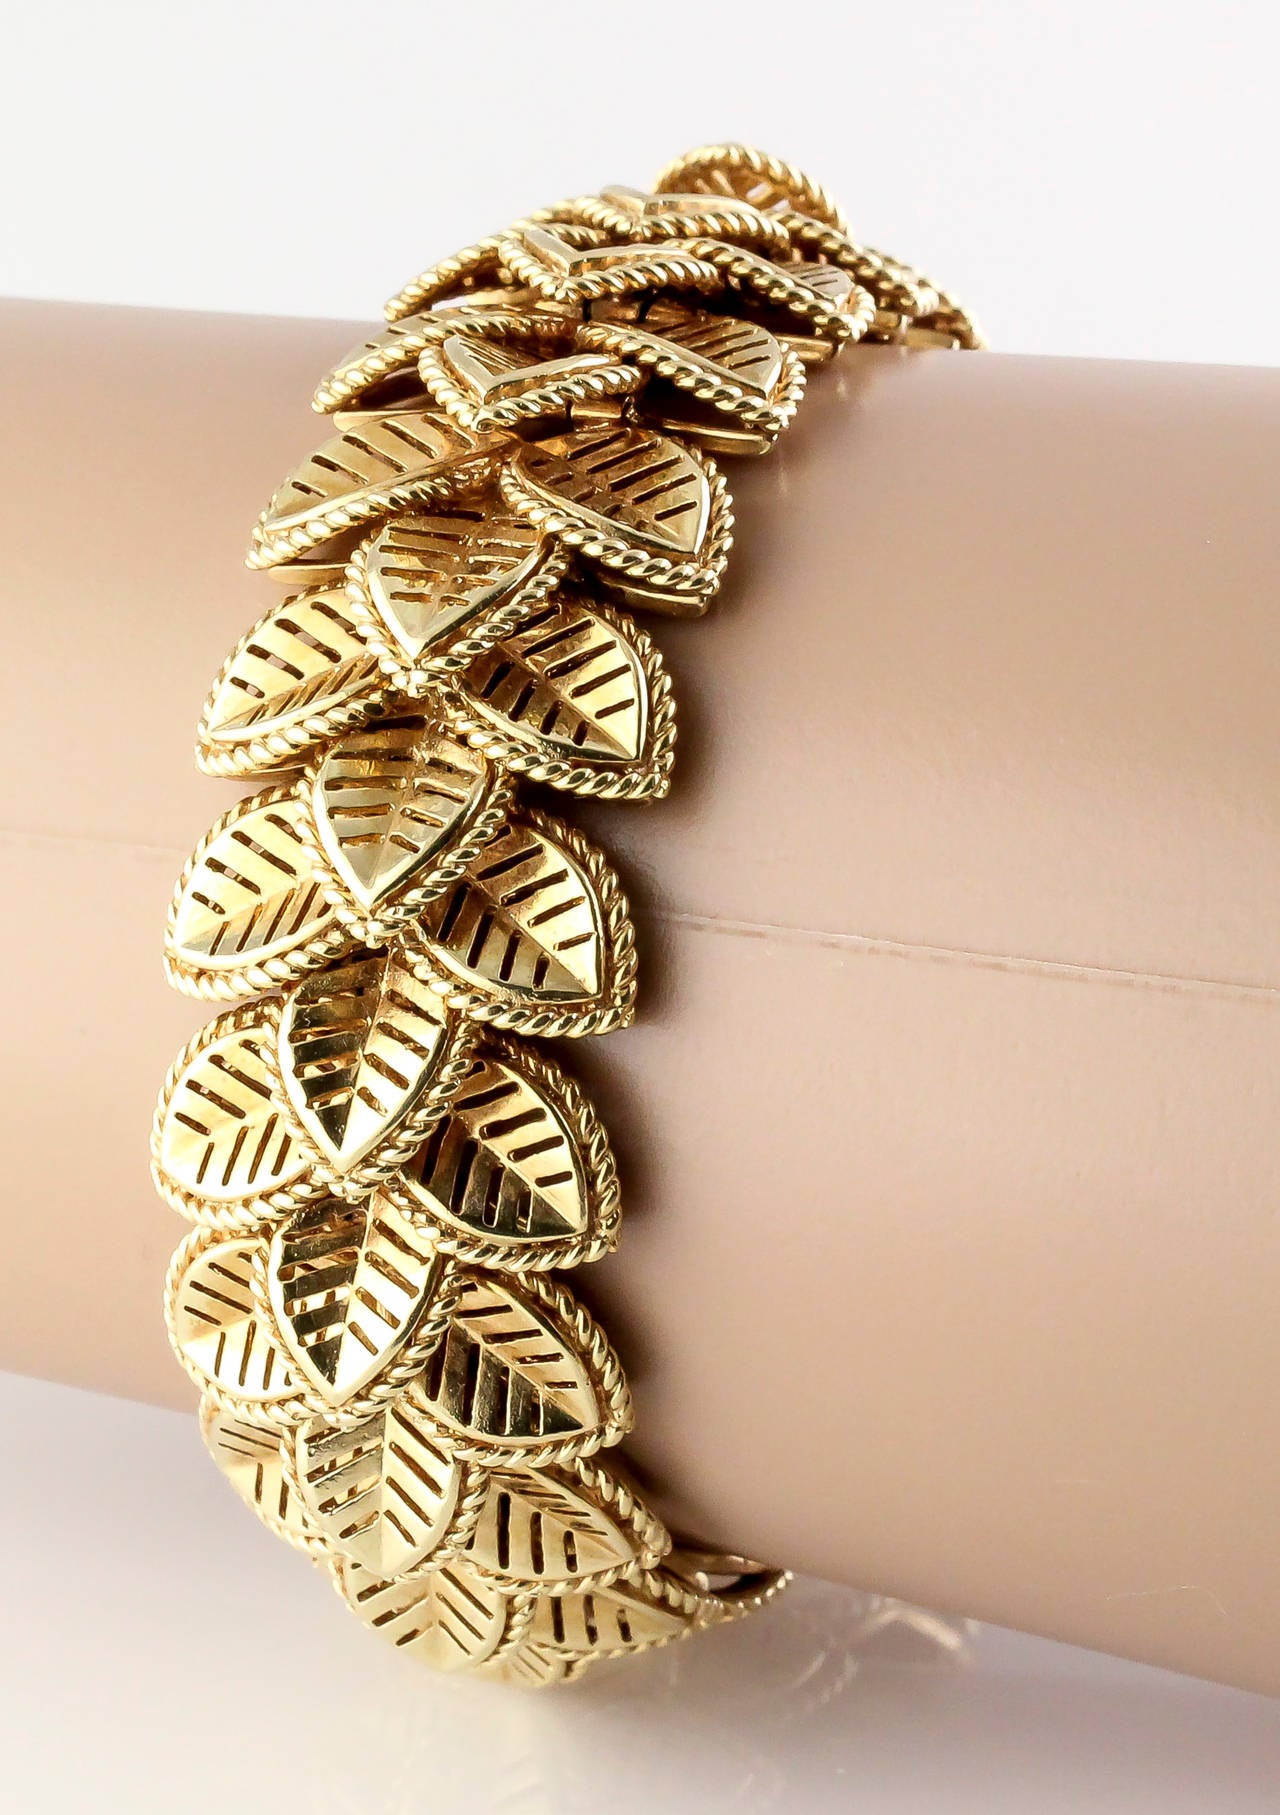 Intricate and unusual 14K yellow gold multi leaf bracelet by Cartier, circa 1950s. Each link on this exquisite bracelet is made up of three leaves with twisted rope borders. Flexible and easy to wear. 

Hallmarks: Cartier, 14K, reference numbers.